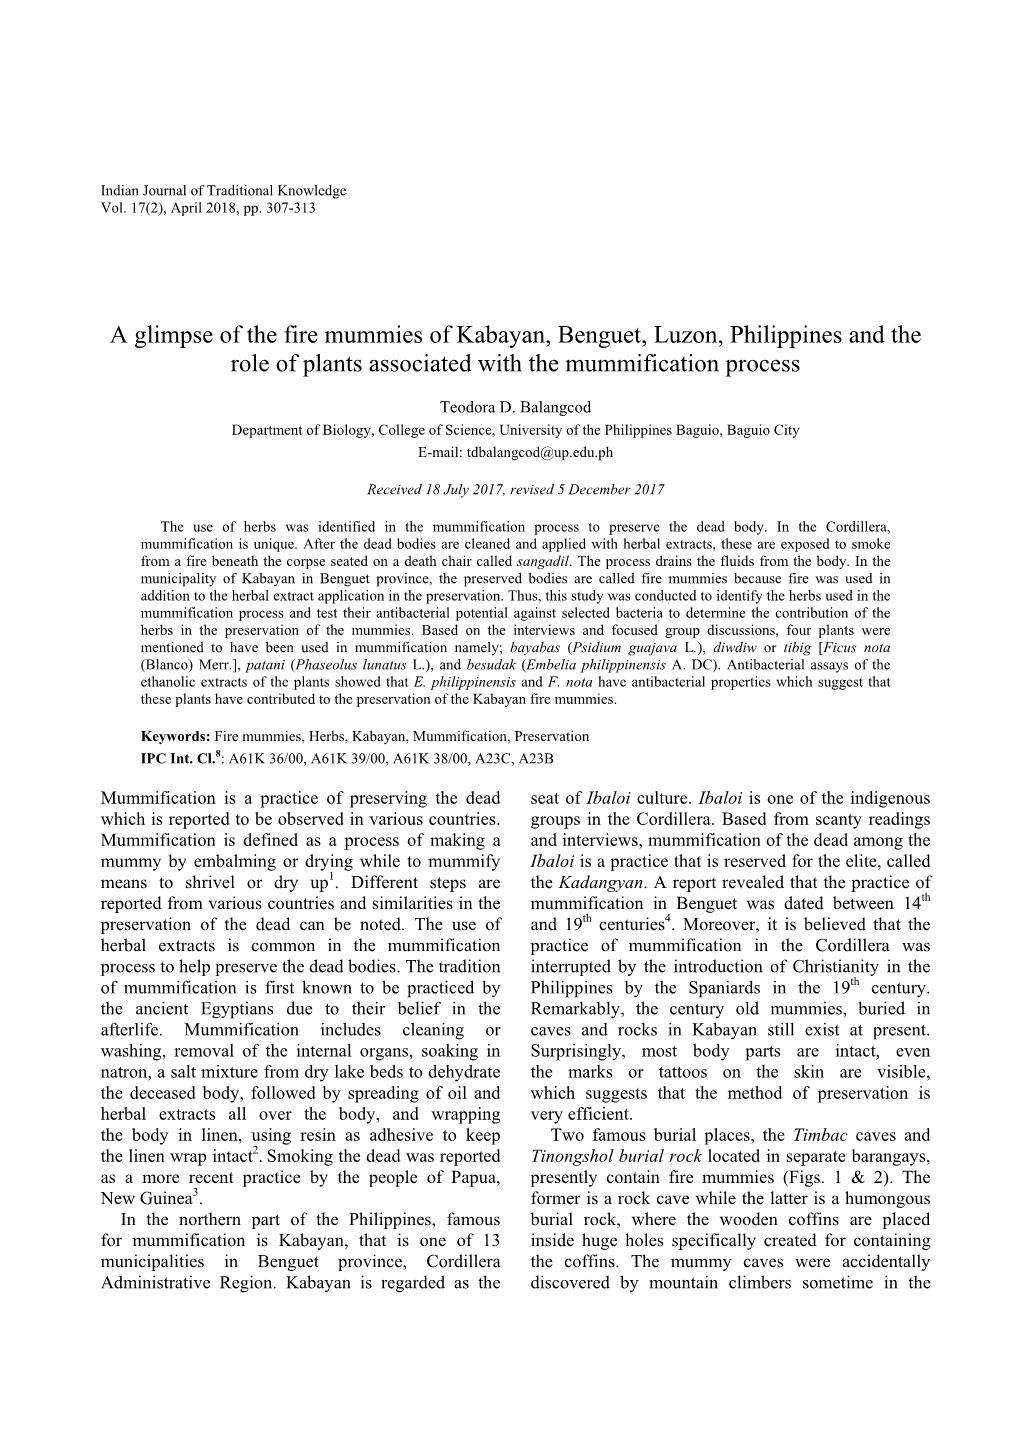 A Glimpse of the Fire Mummies of Kabayan, Benguet, Luzon, Philippines and the Role of Plants Associated with the Mummification Process